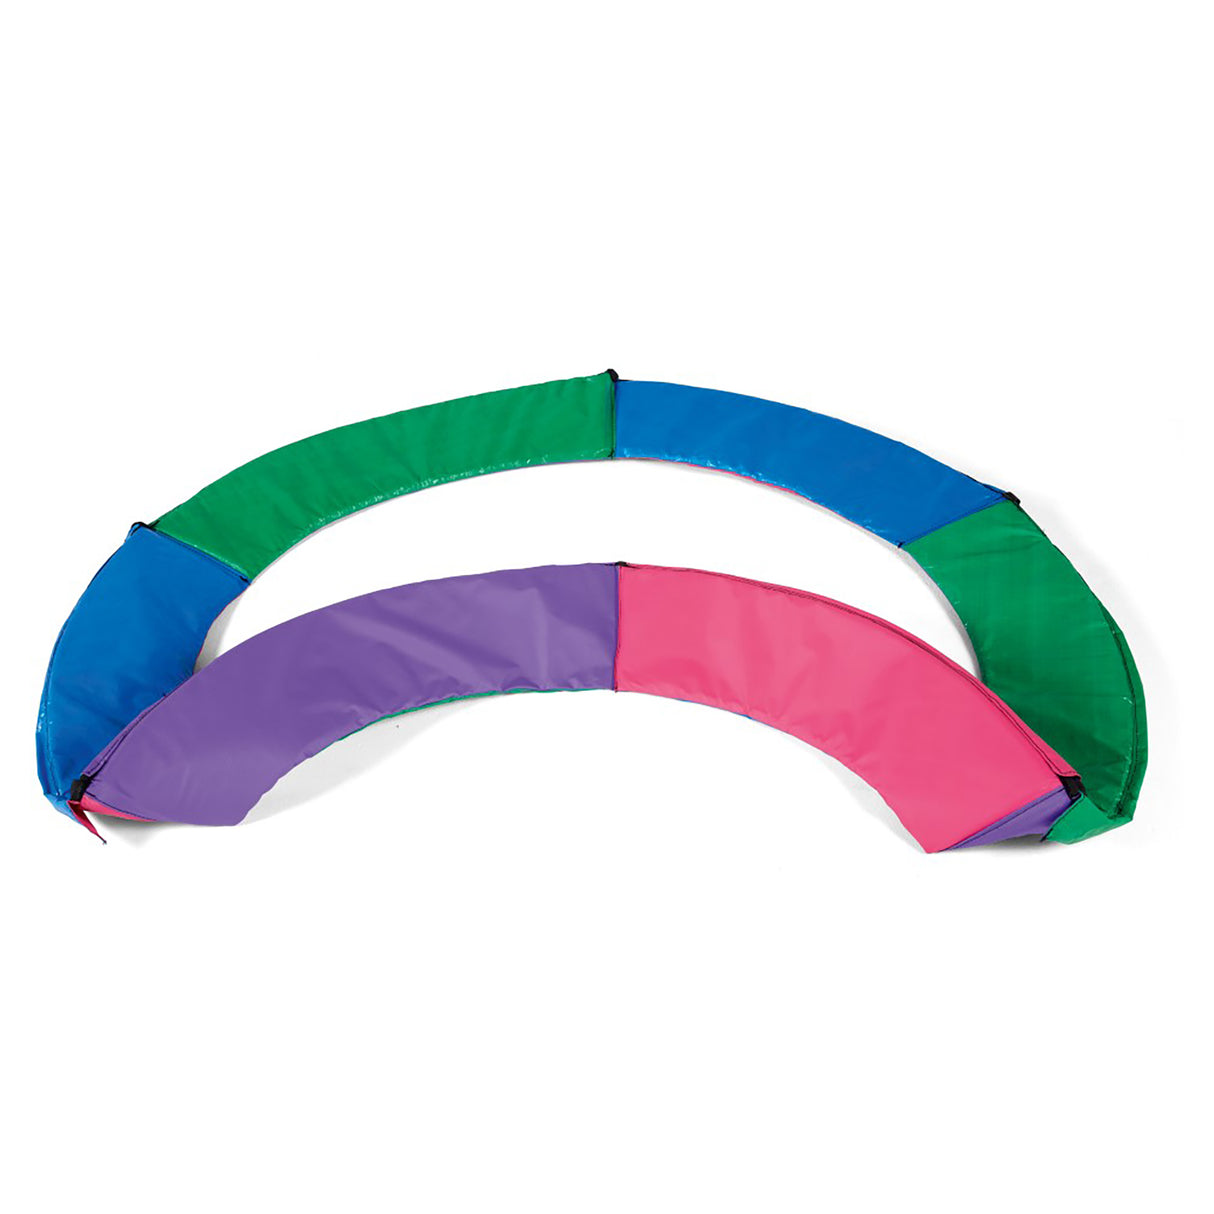 Plum Junior Trampoline with Reversible Pads (4.5 ft)